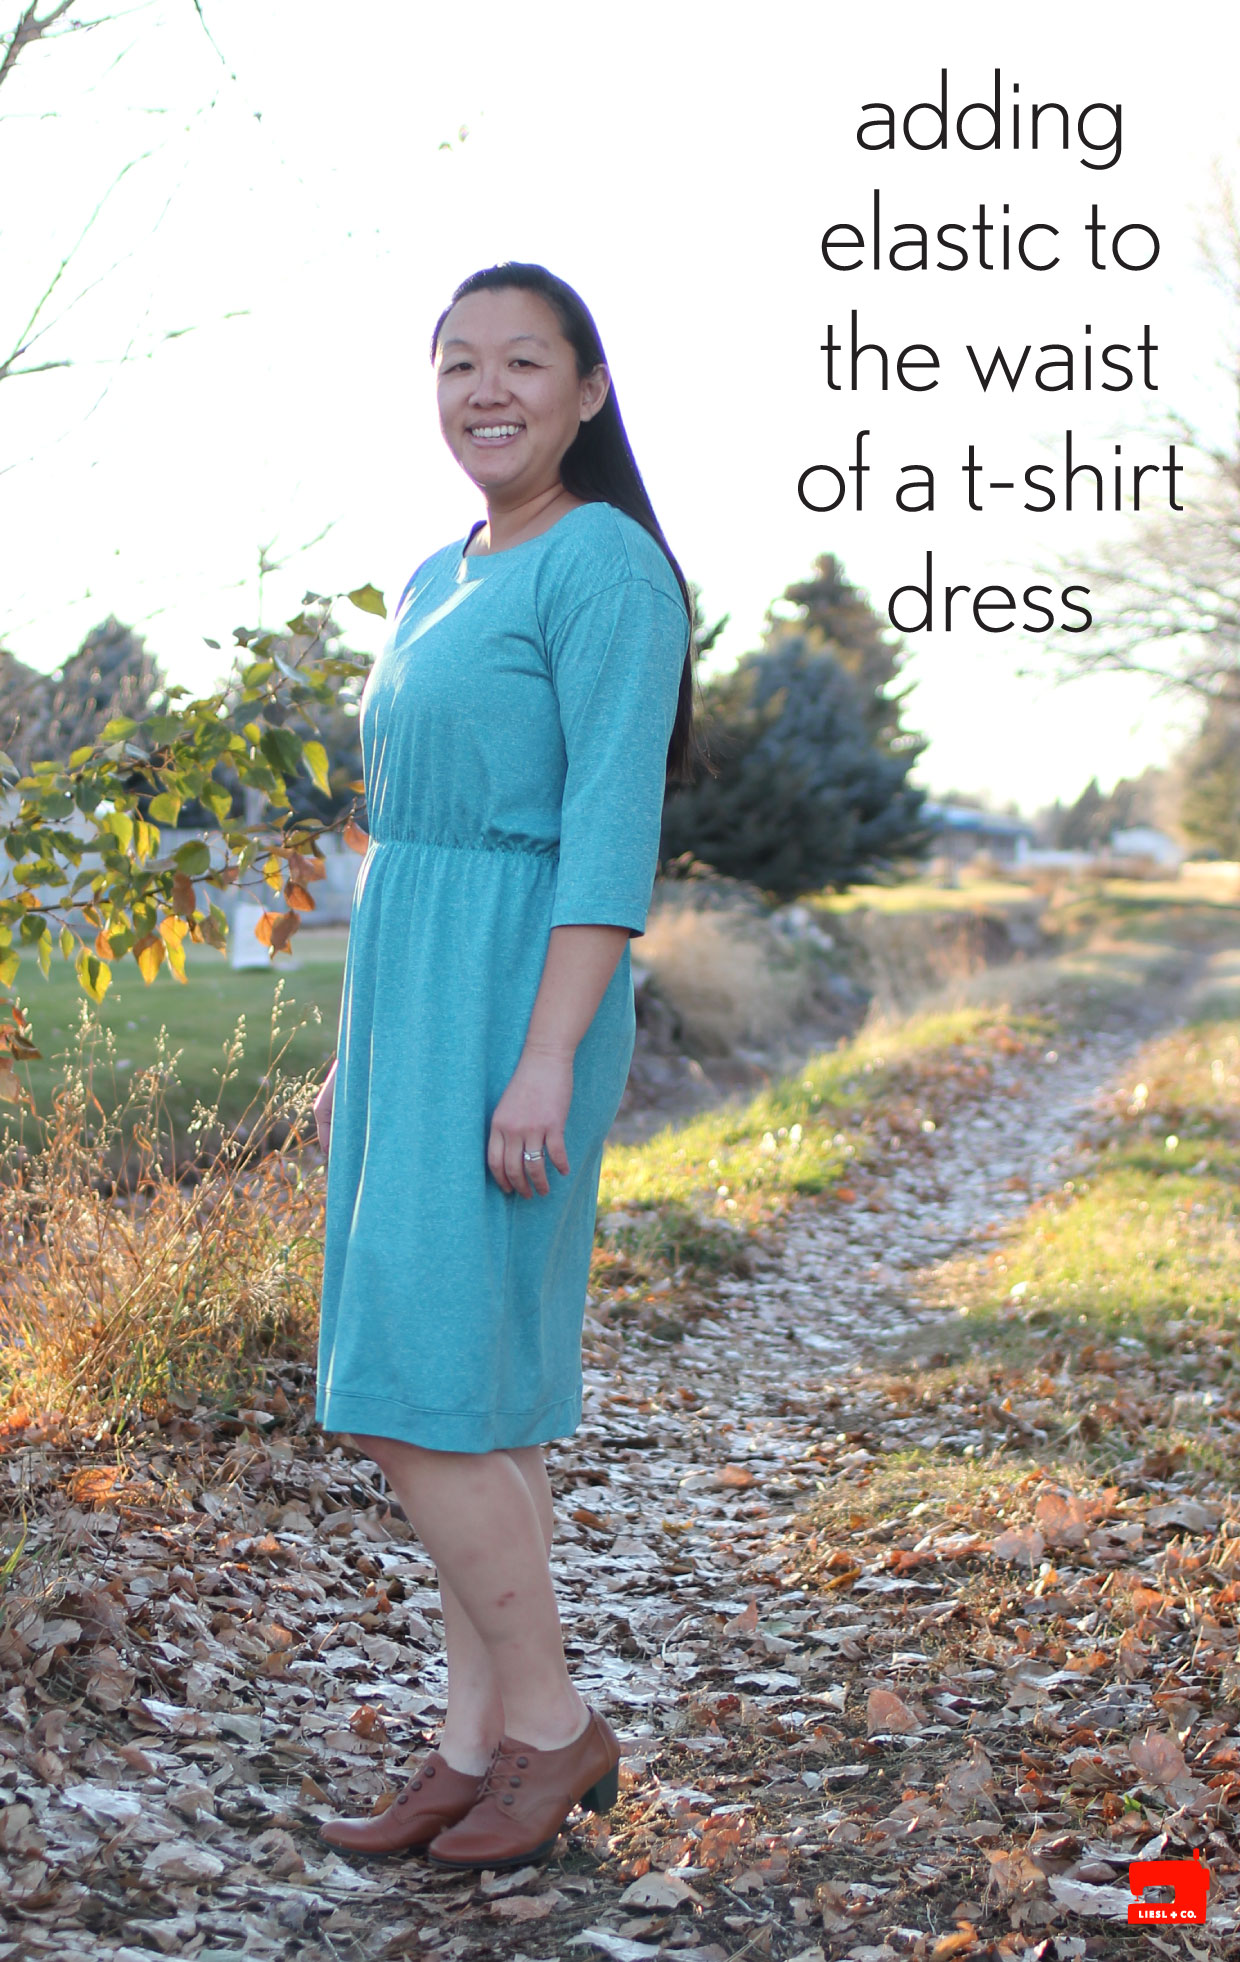 Too big dress? Learn how to shorten straps & take in side seams